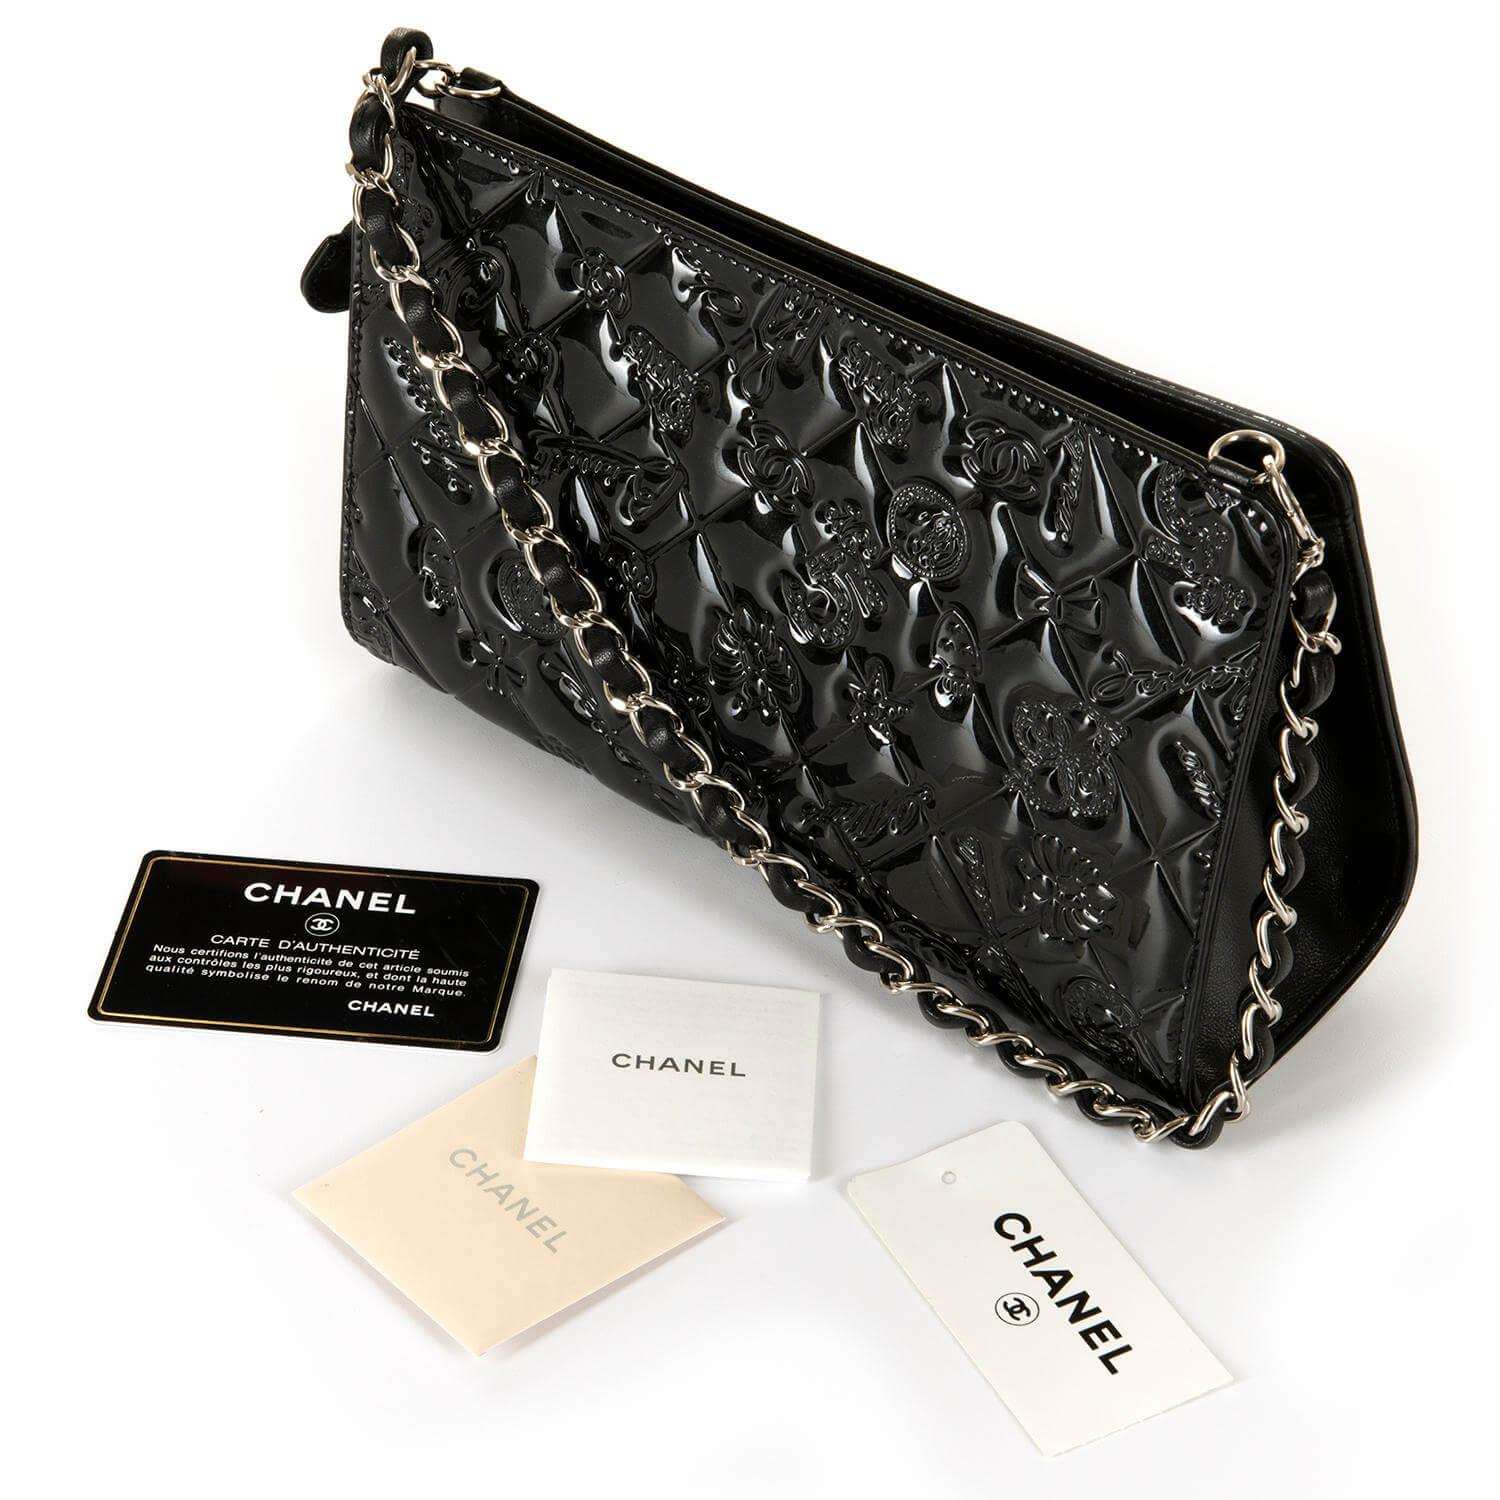 A Very Chic Chanel Black 'Lucky Charms' Embossed, Patent Leather Evening Bag with Silver Hardware. In pristine condition, this rare bag has never been worn and comes with it's Chanel authenticity card, care card & original Tag. The unique Chanel